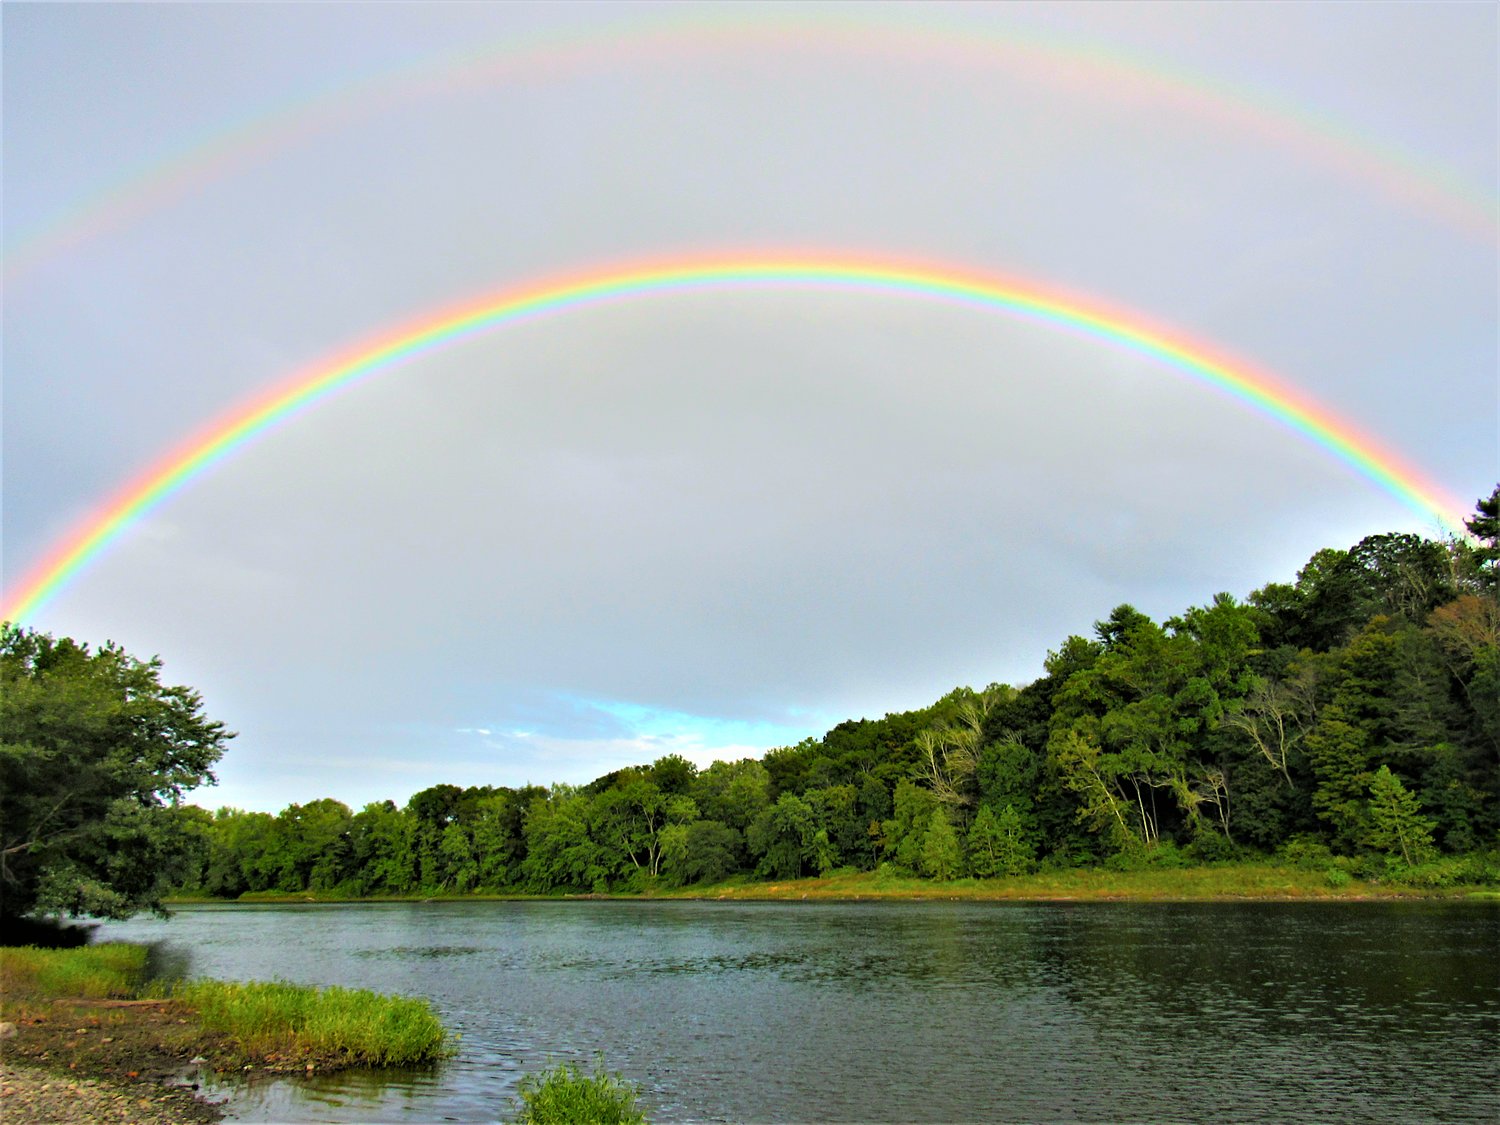 Double rainbow over the Delaware River.